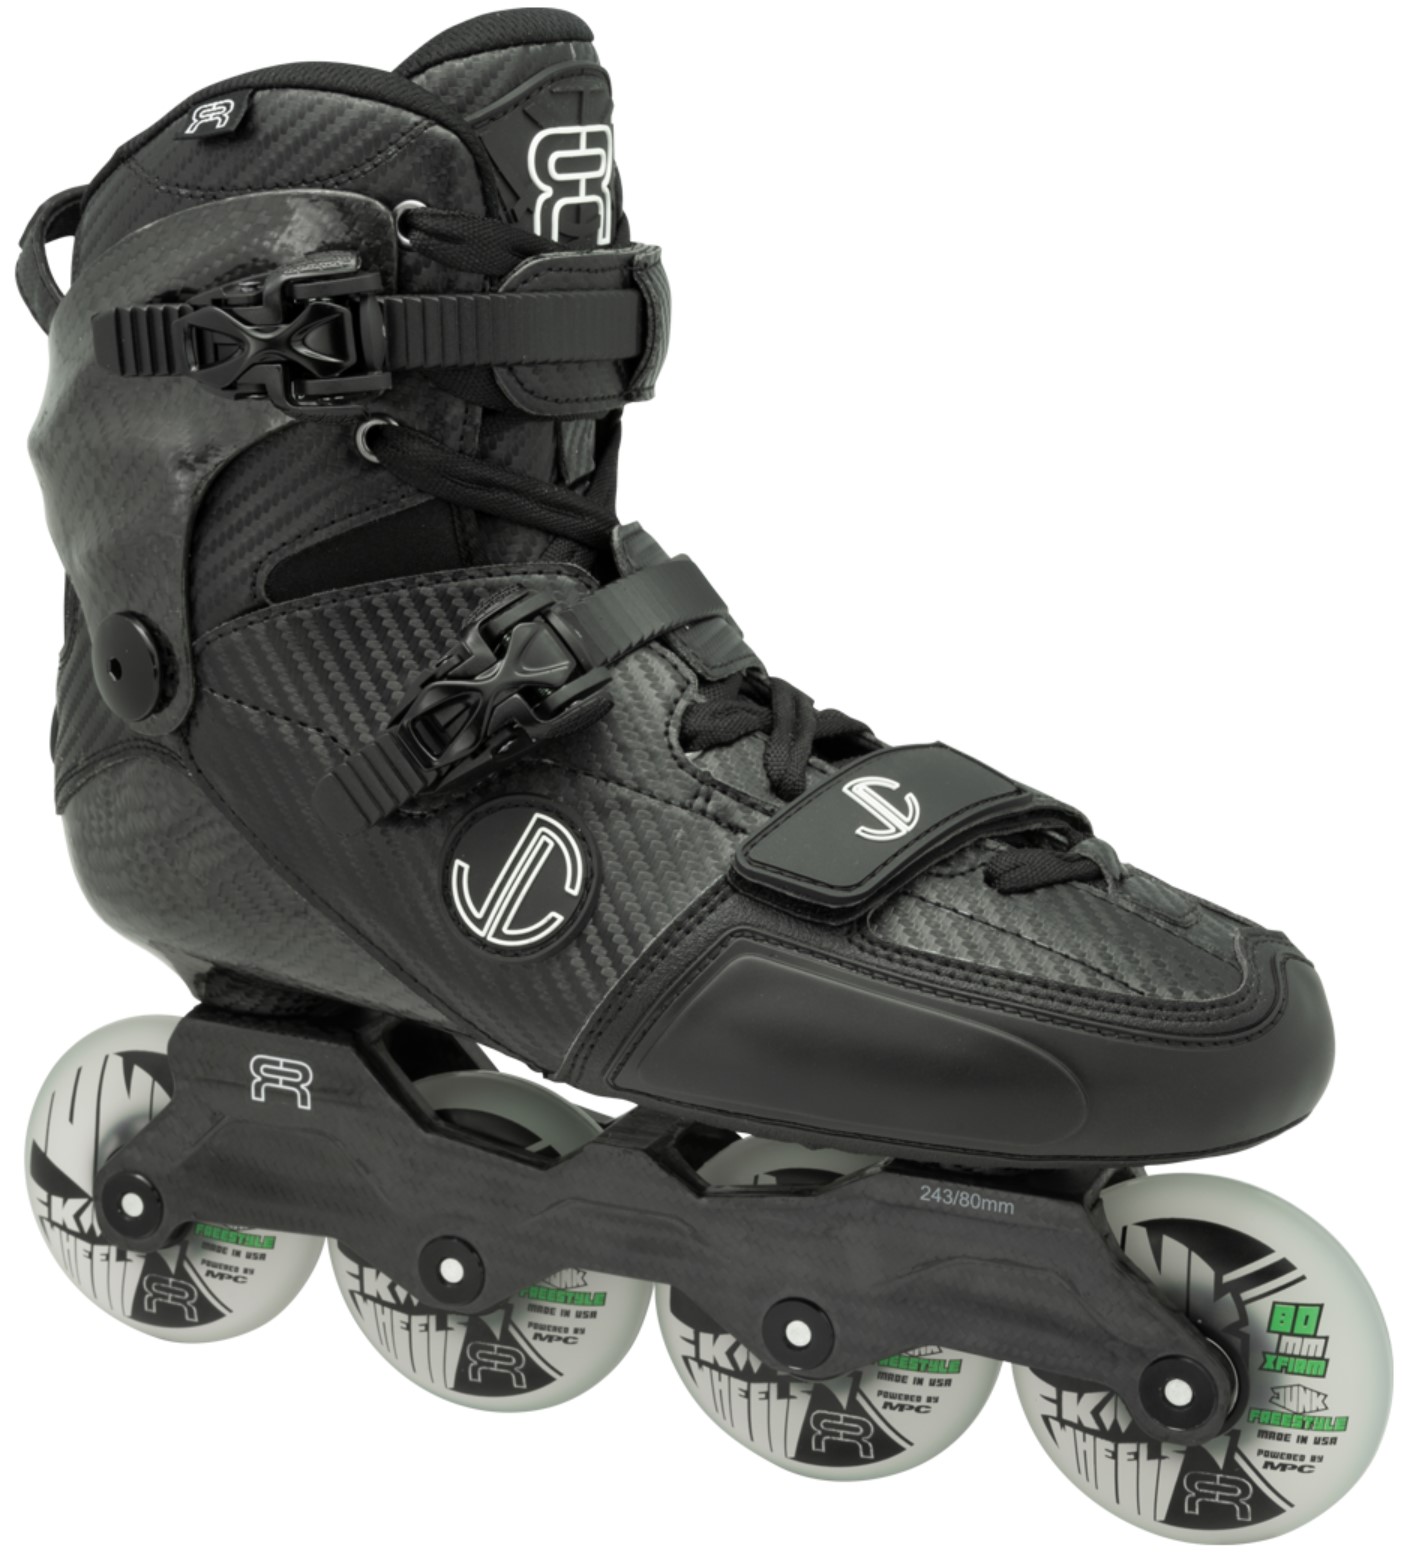 FR SL CARBON 80 freeride and freestyle inline skate with carbon shell, carbon cuff and flat carbon frame for 4 x 80 mm wheels